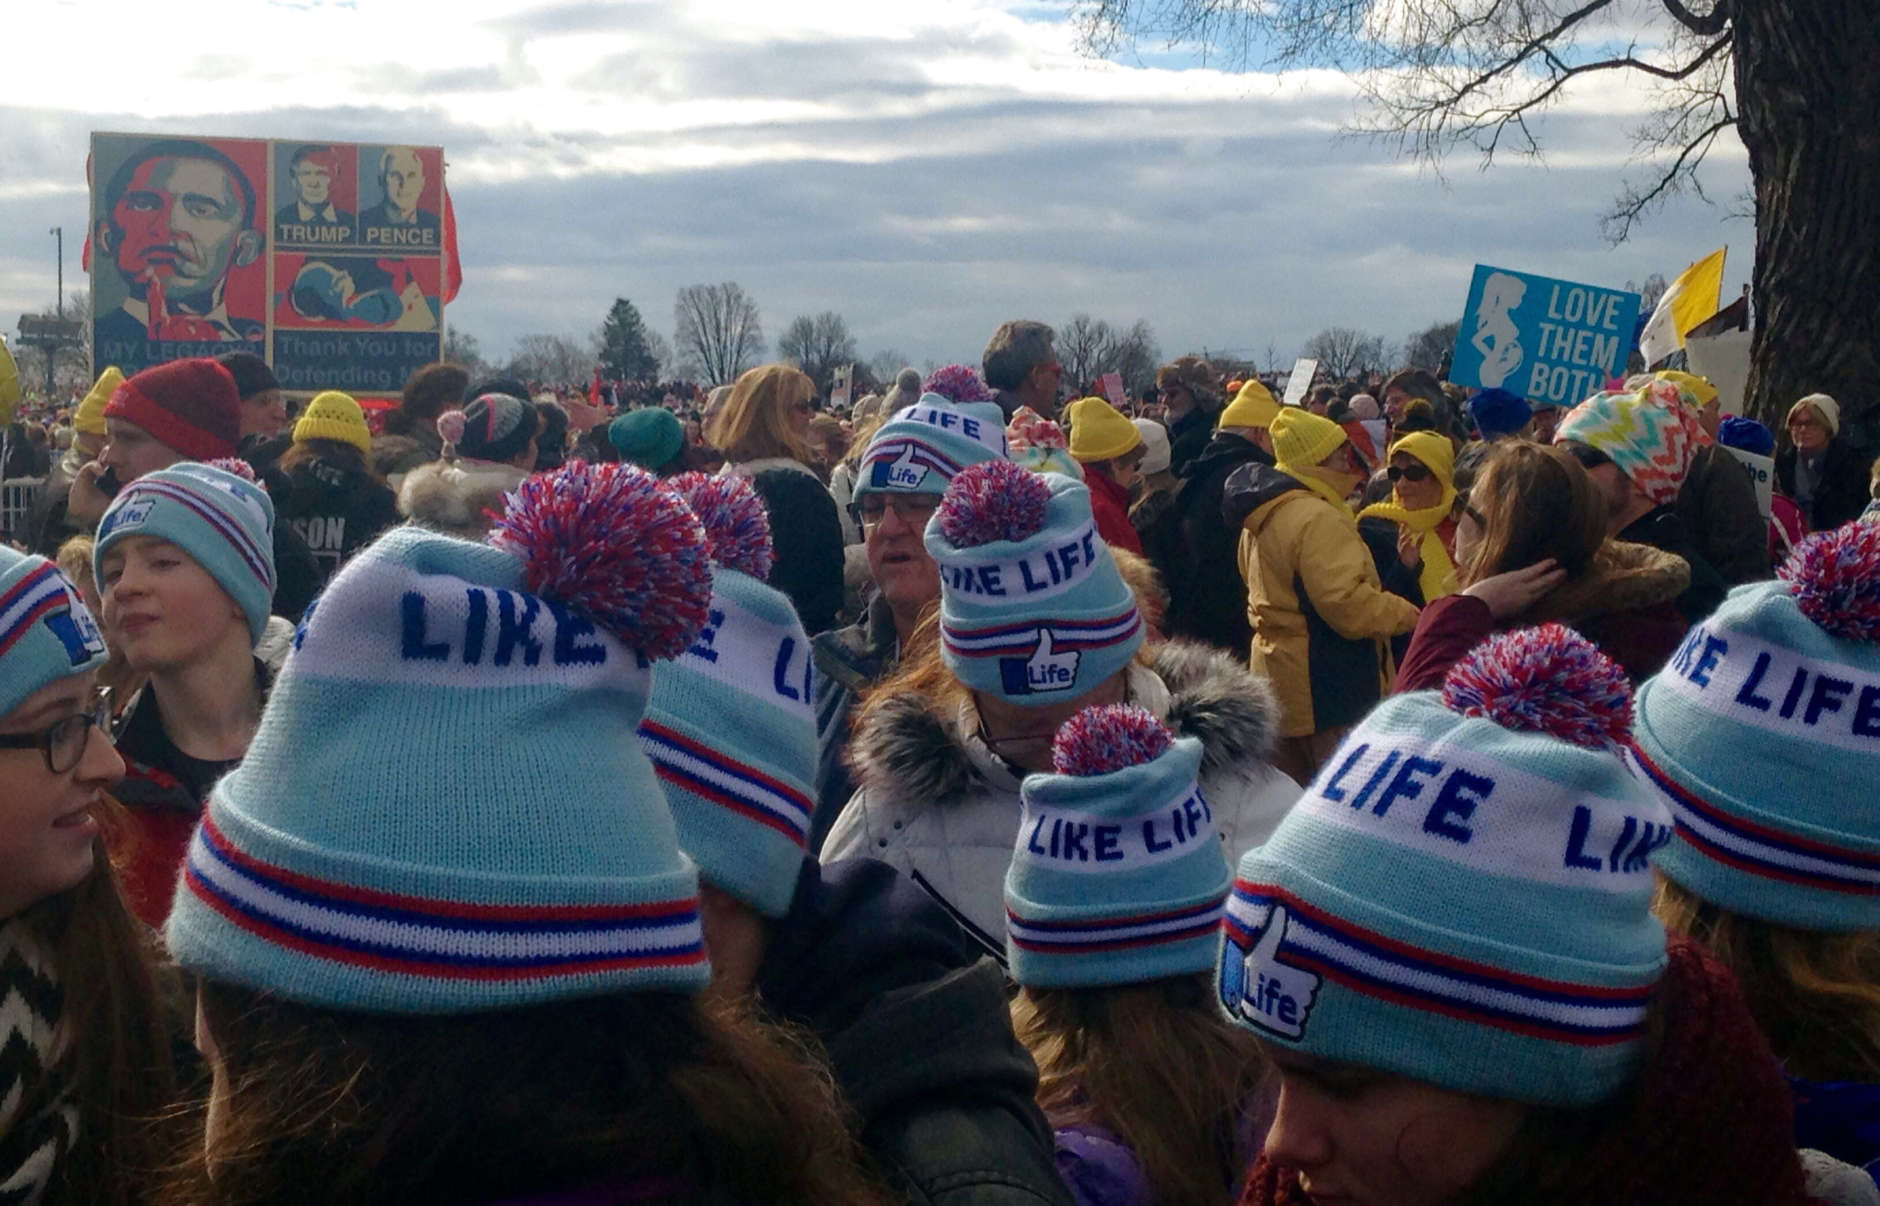 A group of people wearing "Like Life" hats attend the annual March for Life on the National Mall on Friday, Jan. 27, 2017. (WTOP/Megan Cloherty)